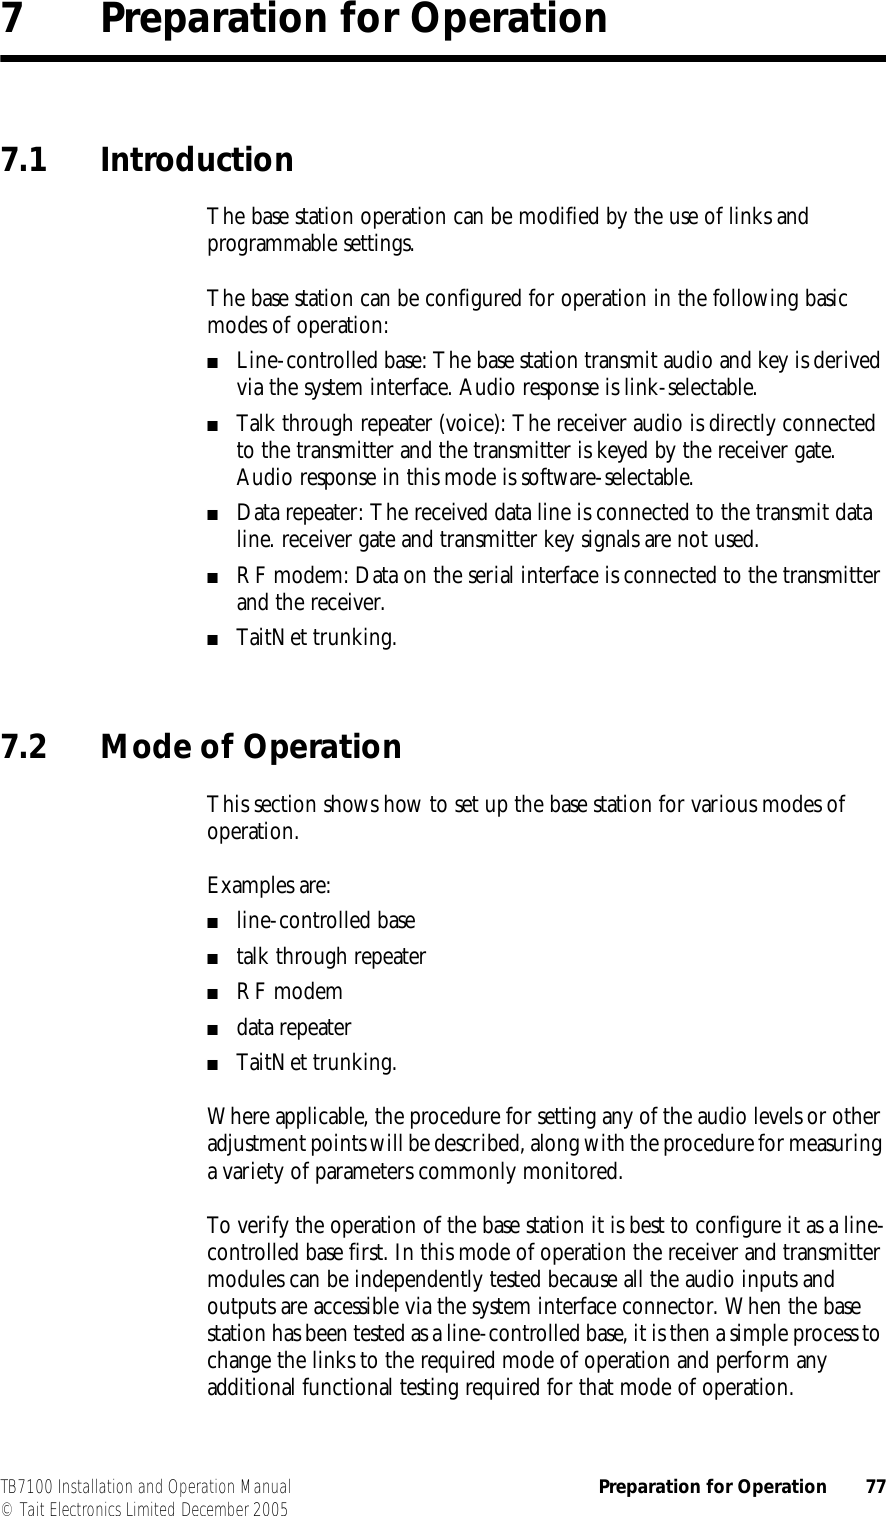  TB7100 Installation and Operation Manual Preparation for Operation 77© Tait Electronics Limited December 20057 Preparation for Operation7.1 IntroductionThe base station operation can be modified by the use of links and programmable settings.The base station can be configured for operation in the following basic modes of operation:■Line-controlled base: The base station transmit audio and key is derived via the system interface. Audio response is link-selectable.■Talk through repeater (voice): The receiver audio is directly connected to the transmitter and the transmitter is keyed by the receiver gate. Audio response in this mode is software-selectable.■Data repeater: The received data line is connected to the transmit data line. receiver gate and transmitter key signals are not used.■RF modem: Data on the serial interface is connected to the transmitter and the receiver.■TaitNet trunking.7.2 Mode of OperationThis section shows how to set up the base station for various modes of operation.Examples are:■line-controlled base■talk through repeater■RF modem■data repeater■TaitNet trunking.Where applicable, the procedure for setting any of the audio levels or other adjustment points will be described, along with the procedure for measuring a variety of parameters commonly monitored. To verify the operation of the base station it is best to configure it as a line-controlled base first. In this mode of operation the receiver and transmitter modules can be independently tested because all the audio inputs and outputs are accessible via the system interface connector. When the base station has been tested as a line-controlled base, it is then a simple process to change the links to the required mode of operation and perform any additional functional testing required for that mode of operation.